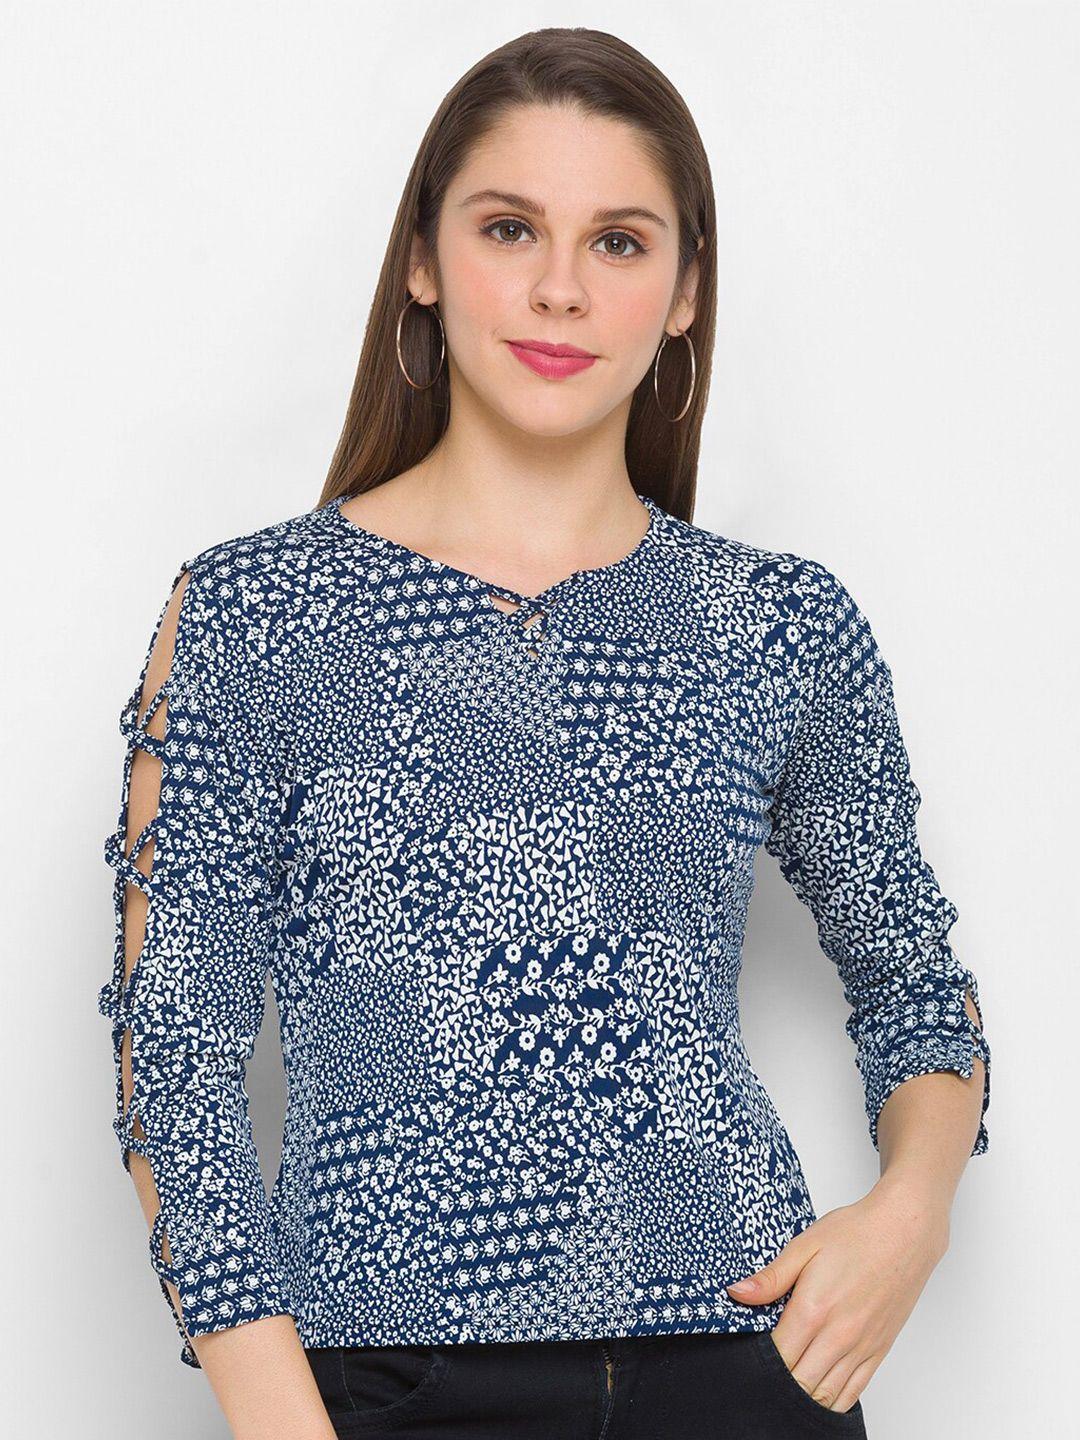 globus-navy-blue-&-white-ditsy-floral-print-top